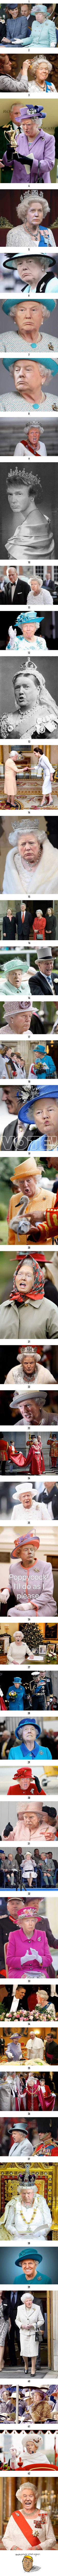 42 Trump And Queen Mash-Ups That Will Make America Great Britain Again